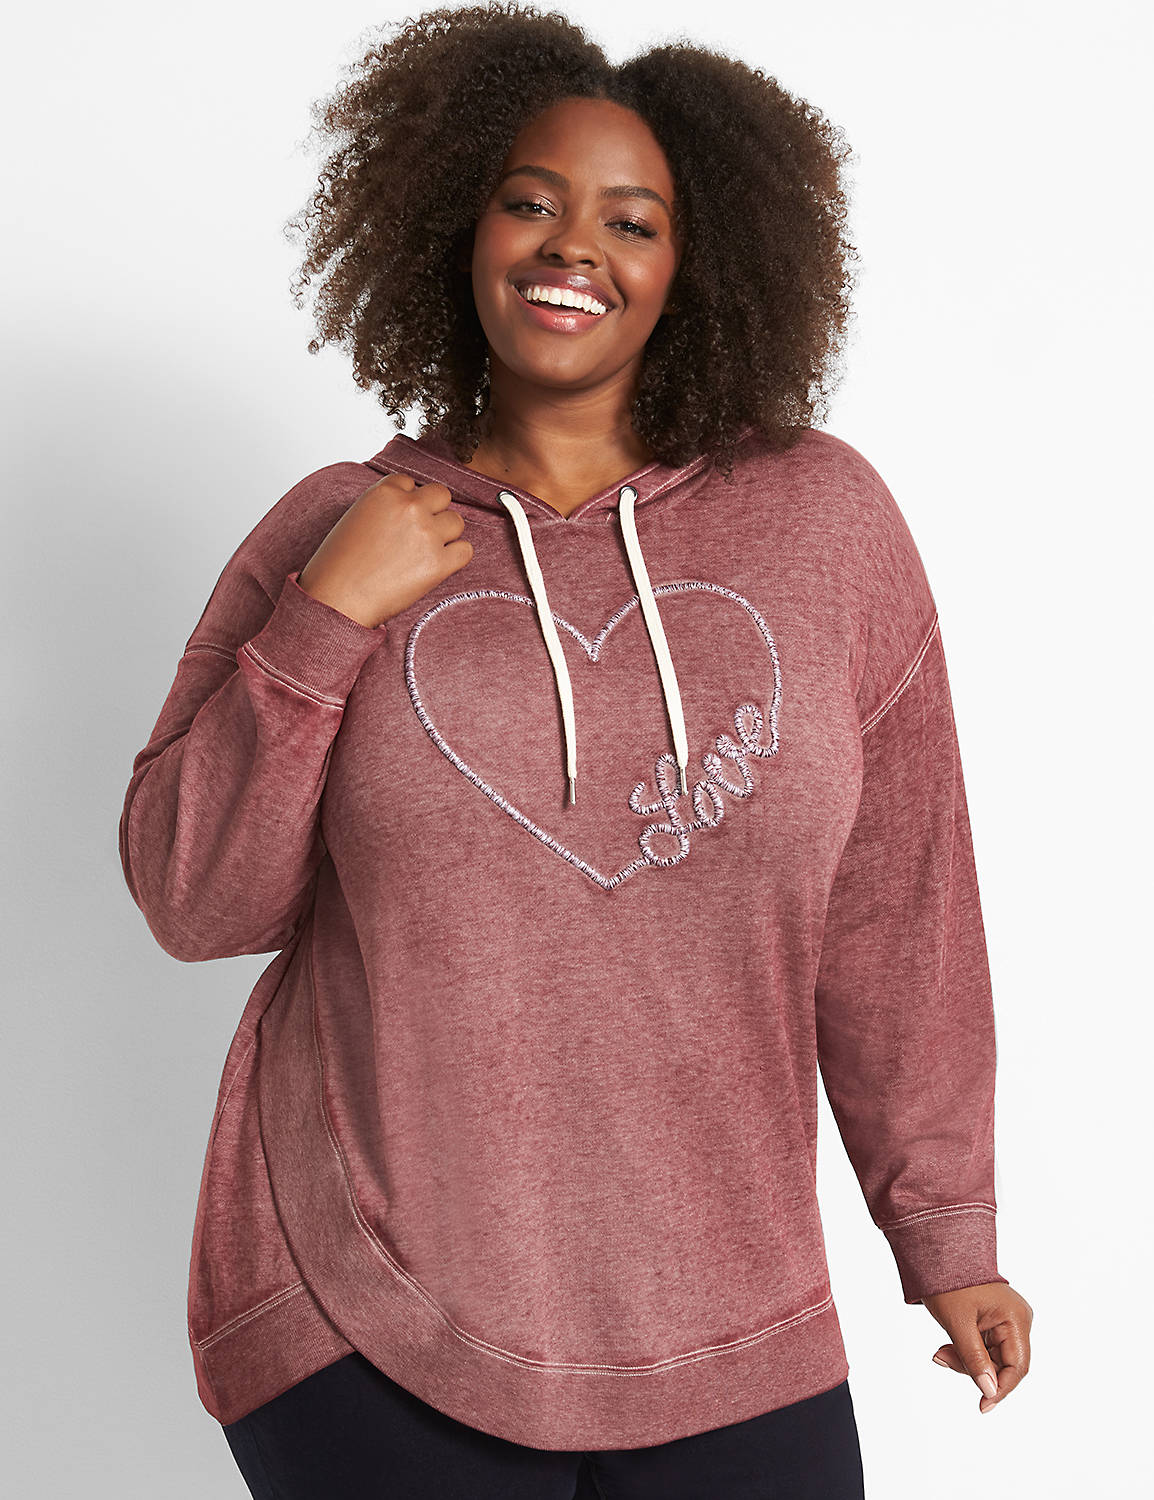 Heart Graphic Layered Hoodie Product Image 1